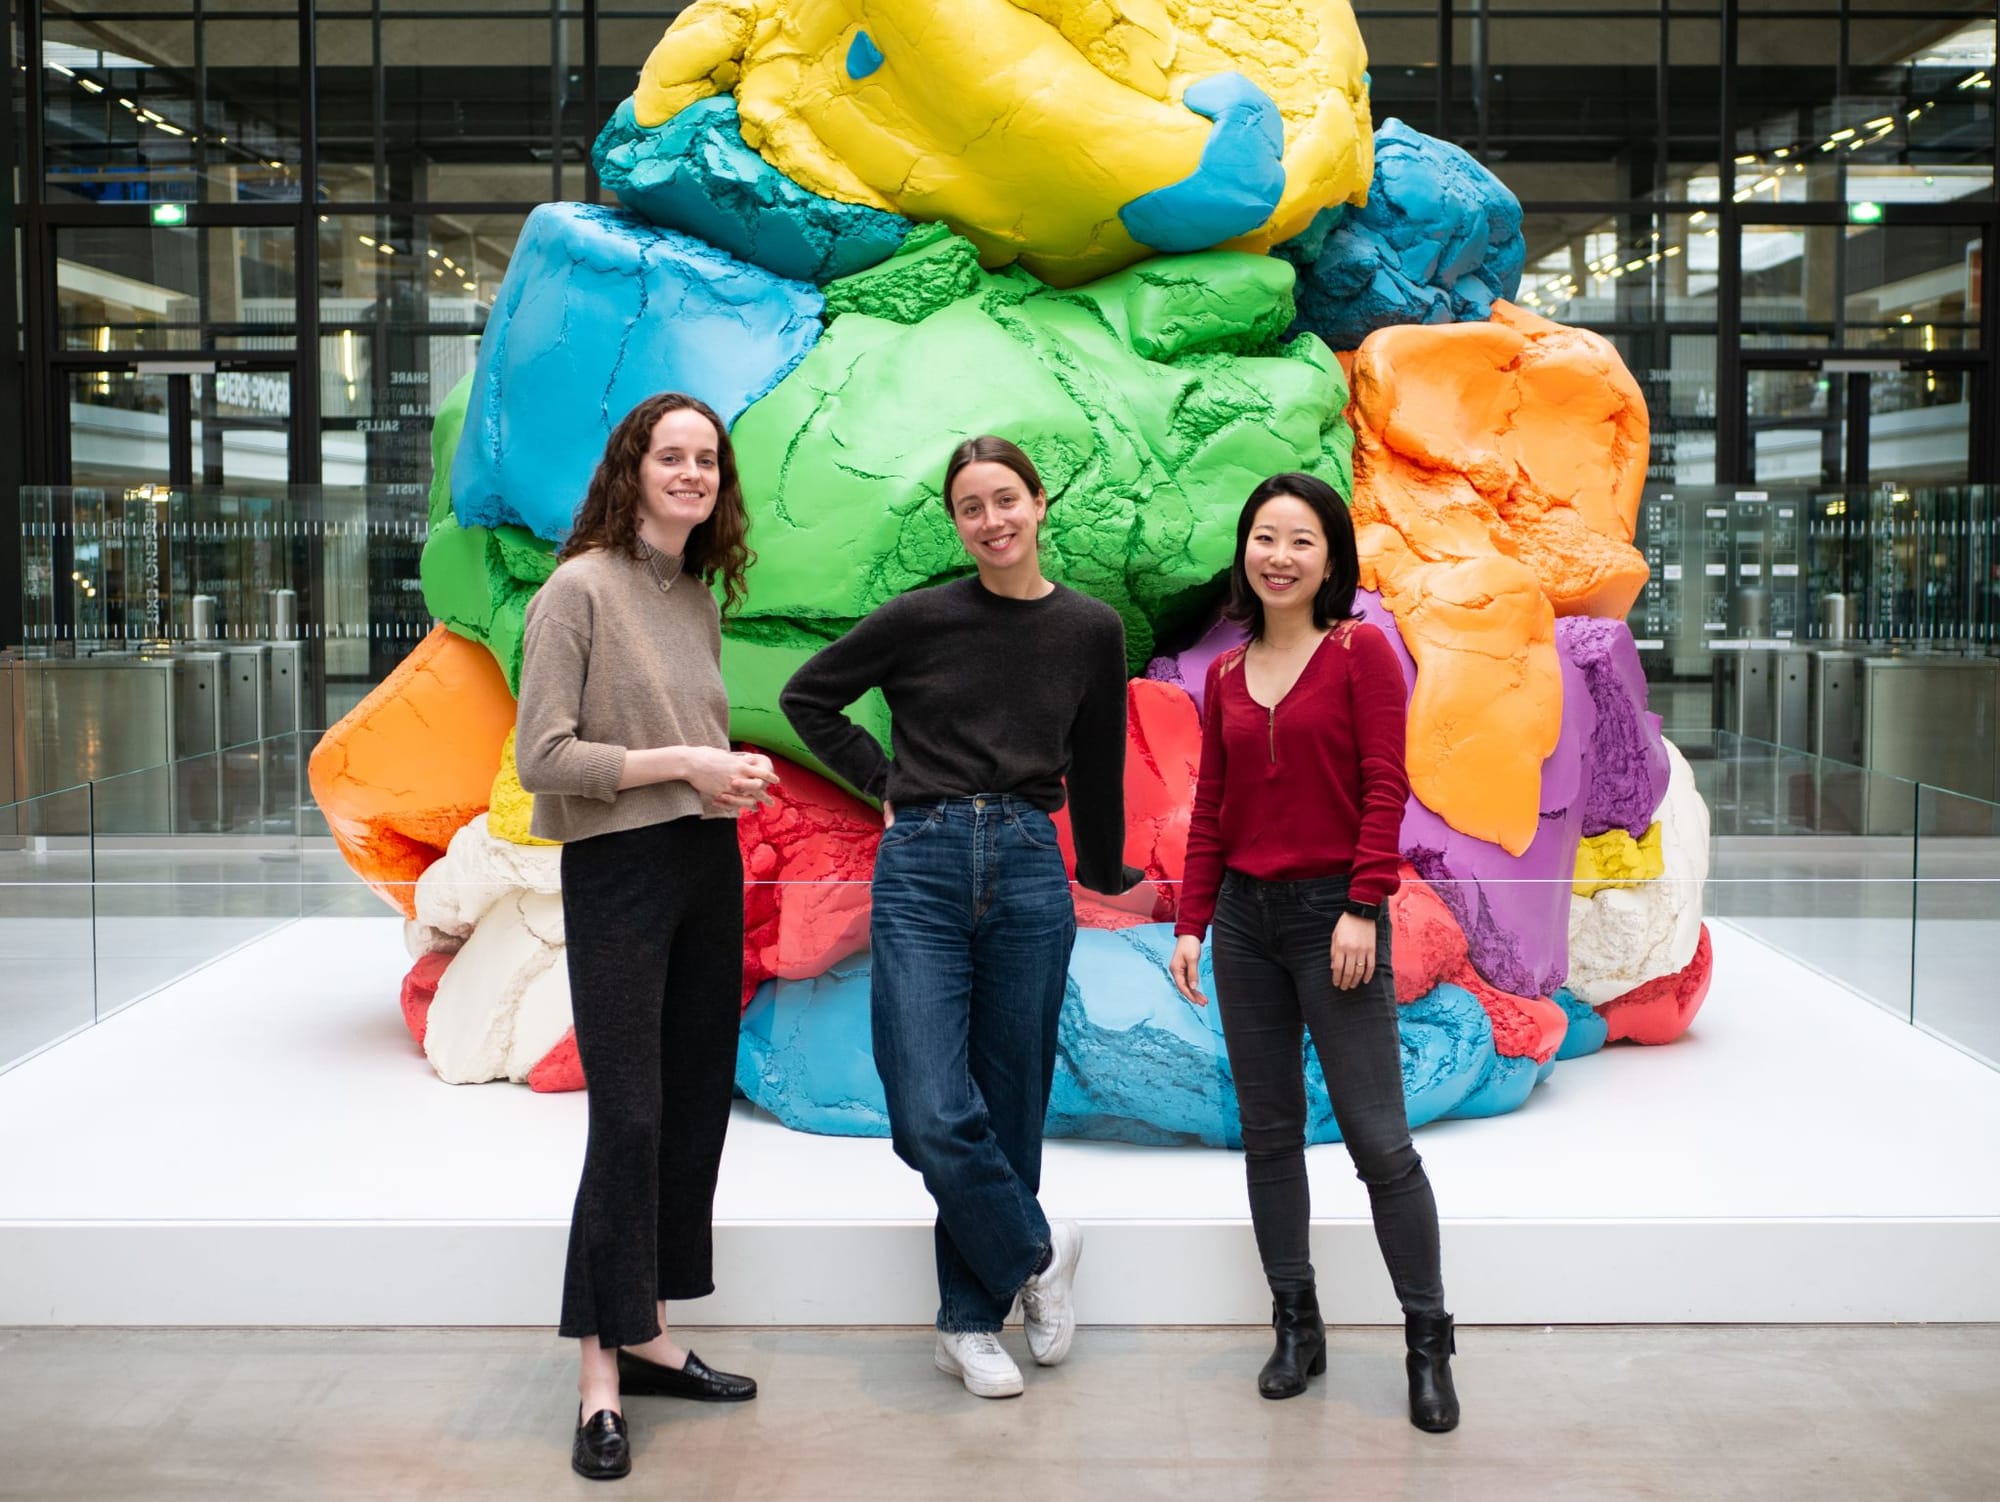 Omena co-founders (left to right): Jane Douat, Mathilde Nême, and Hahyeon Park